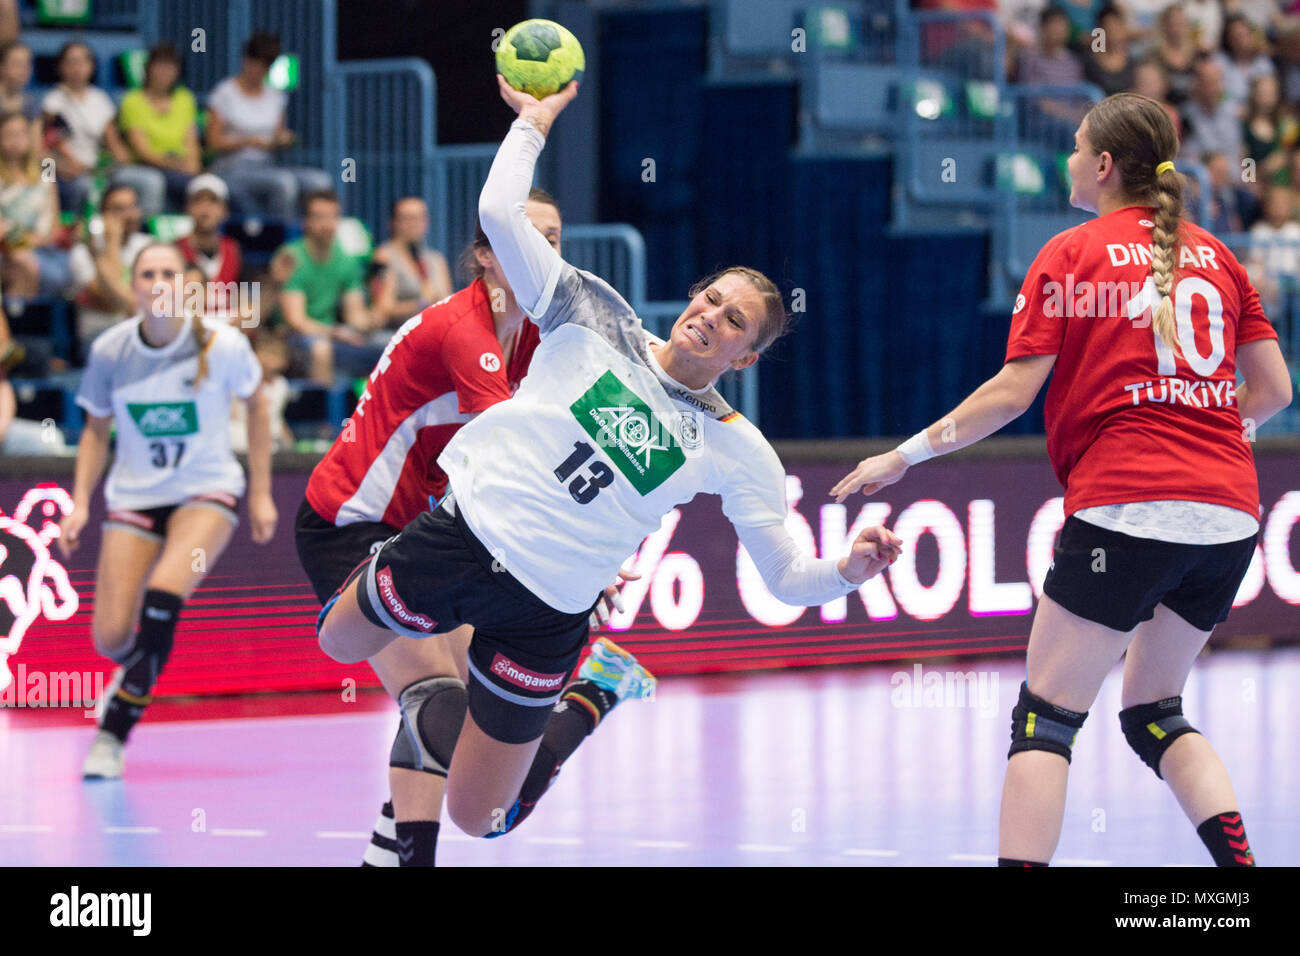 Julia BEHNKE (GER) throws on the goal, action, fight for the ball, throw, handball women's European Championship qualification, Group 6, Germany (GER) - Turkey (TUR) 40:17, on 02.06.2018 in Gummersbach/Germany, | usage worldwide Stock Photo